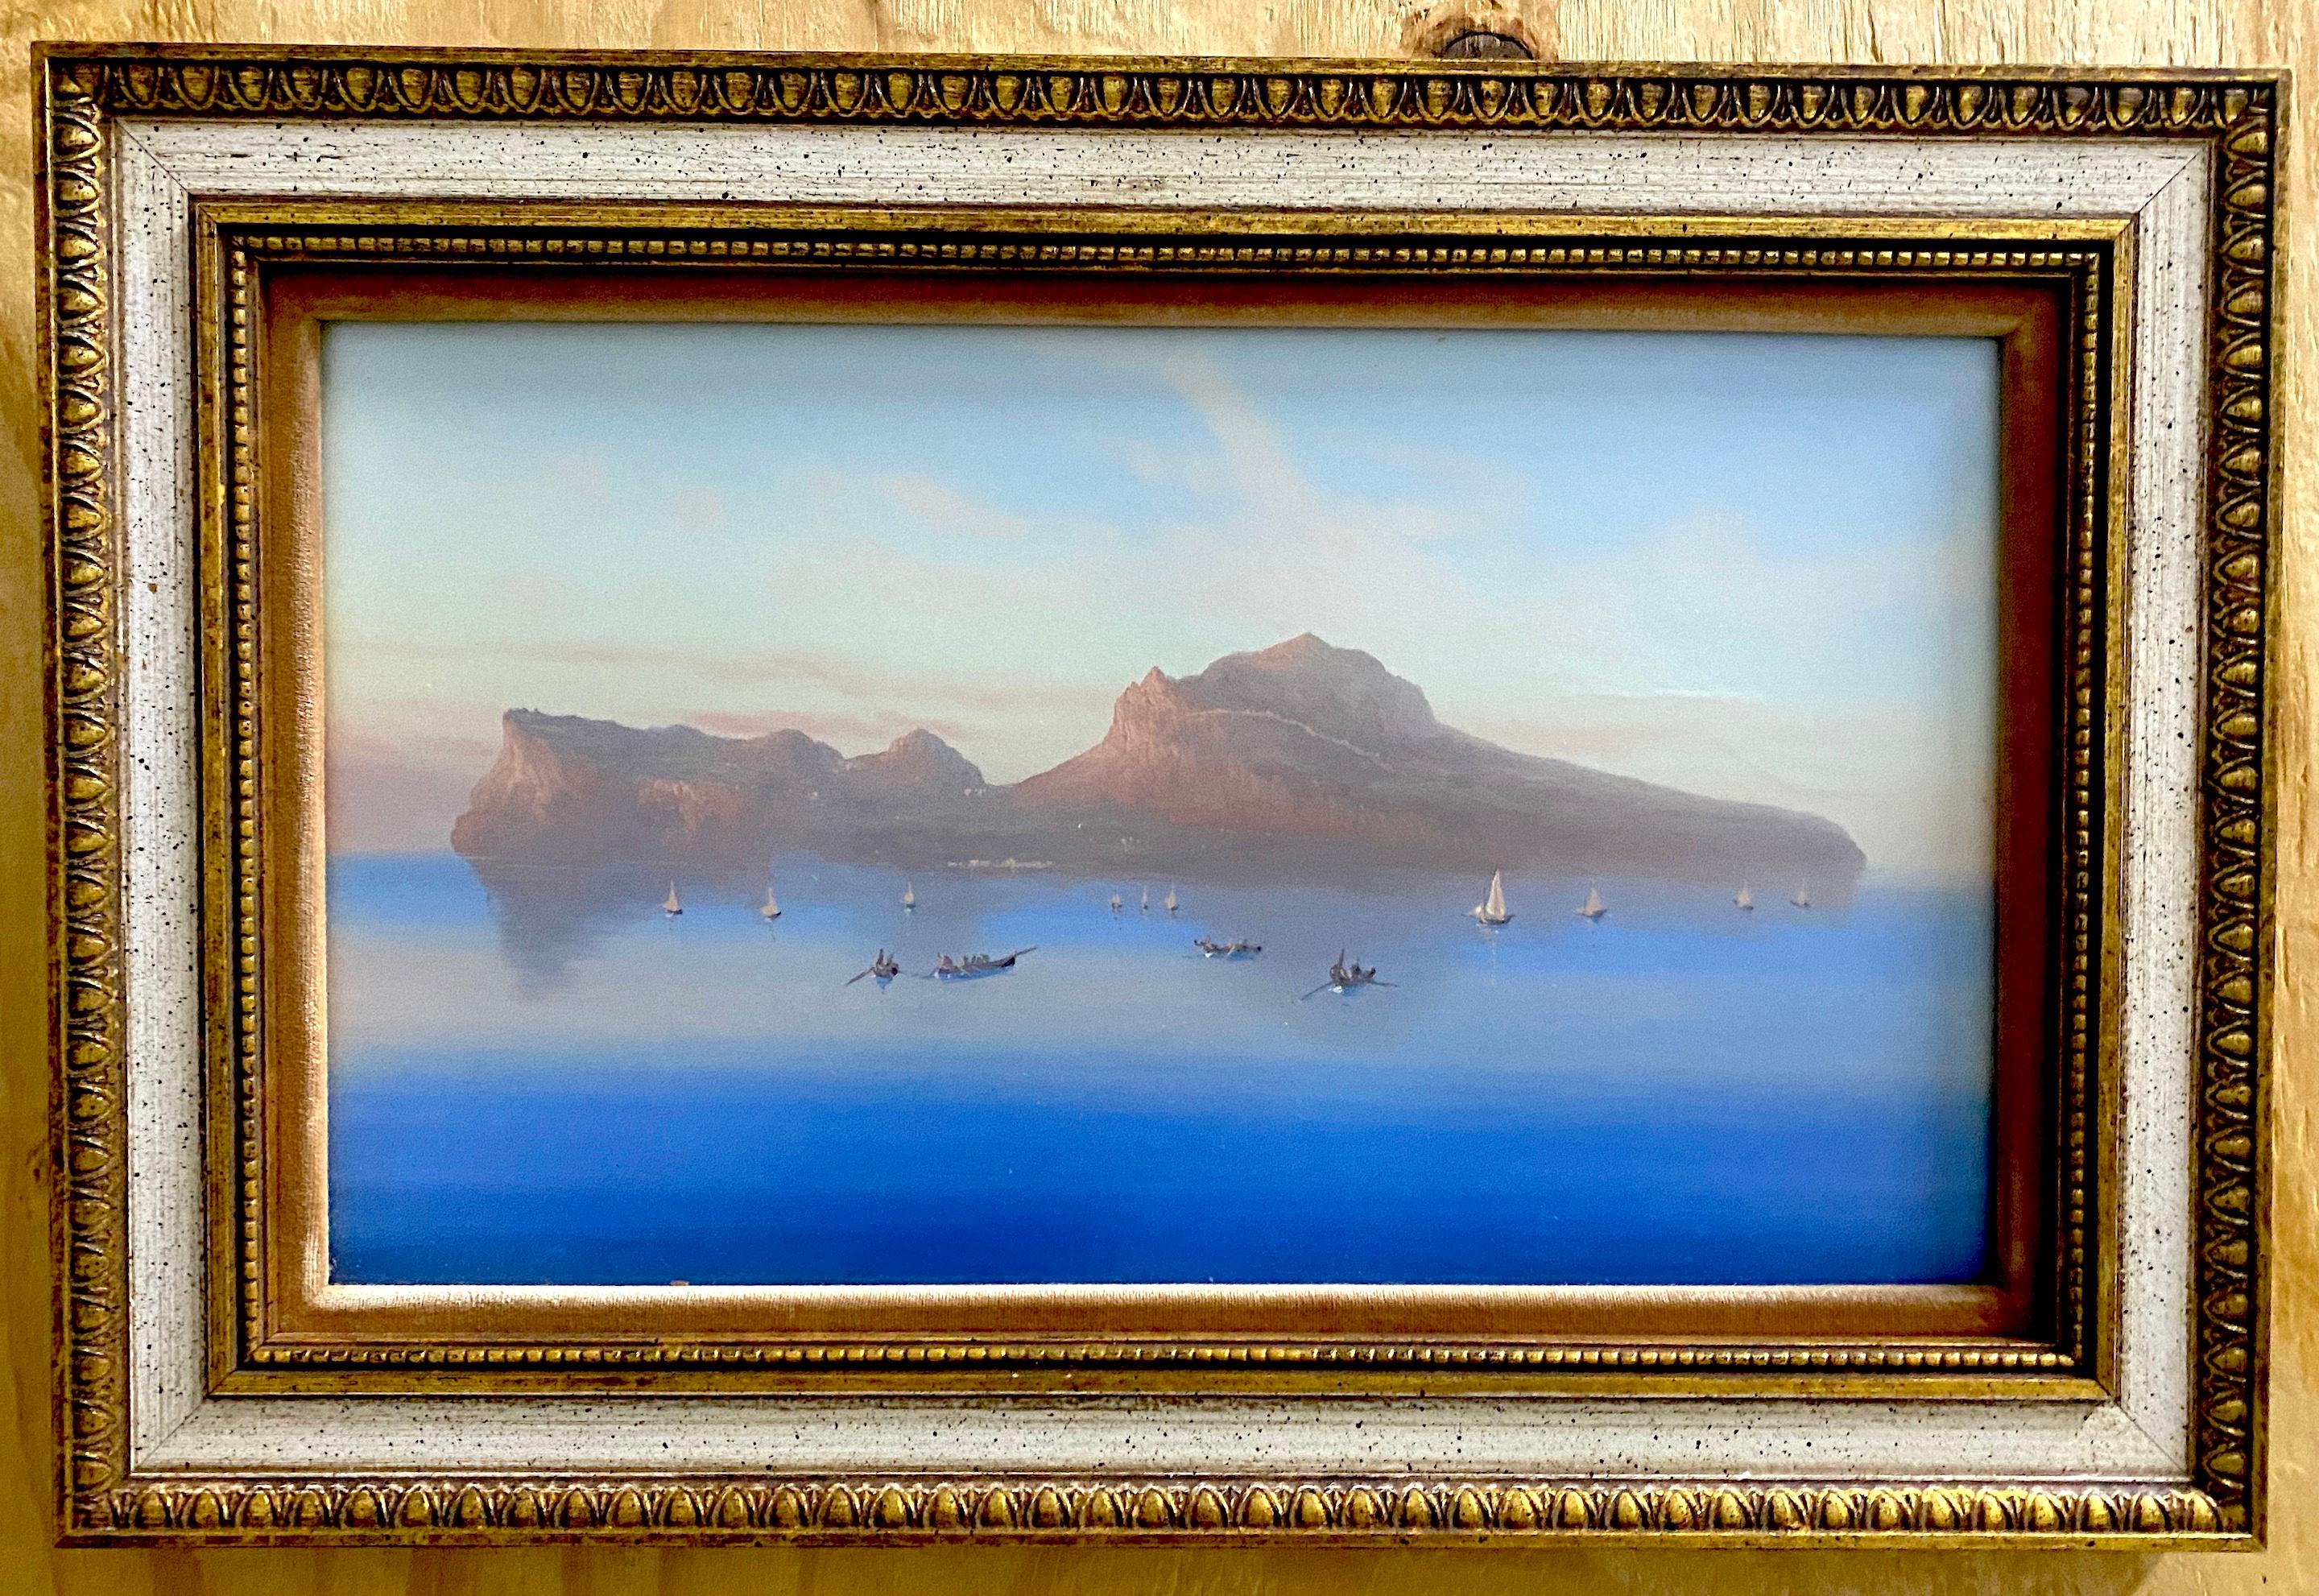  Pair of Neapolitan Grand Tour Gouaches Naples Bay & Mount Vesuvius- Smaller In Good Condition For Sale In West Palm Beach, FL